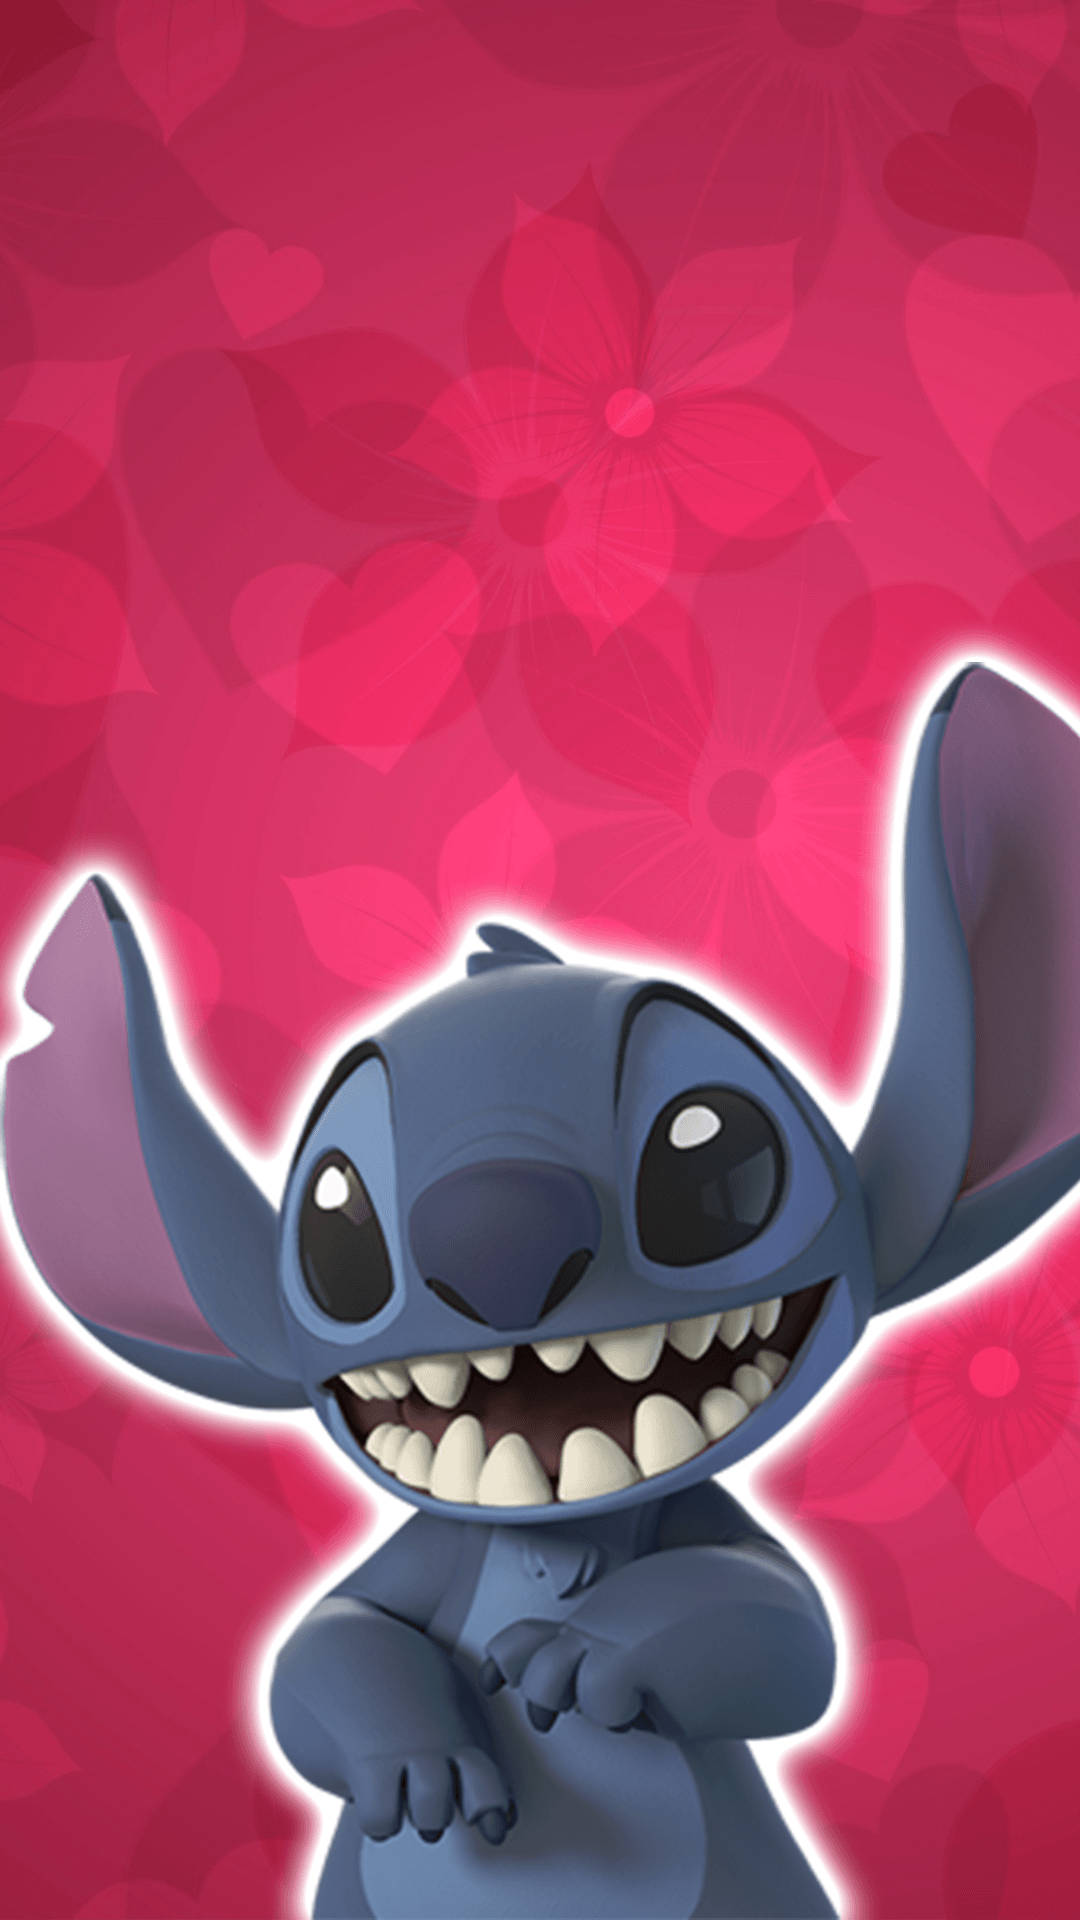 Smiling Stitch 3d Rendered